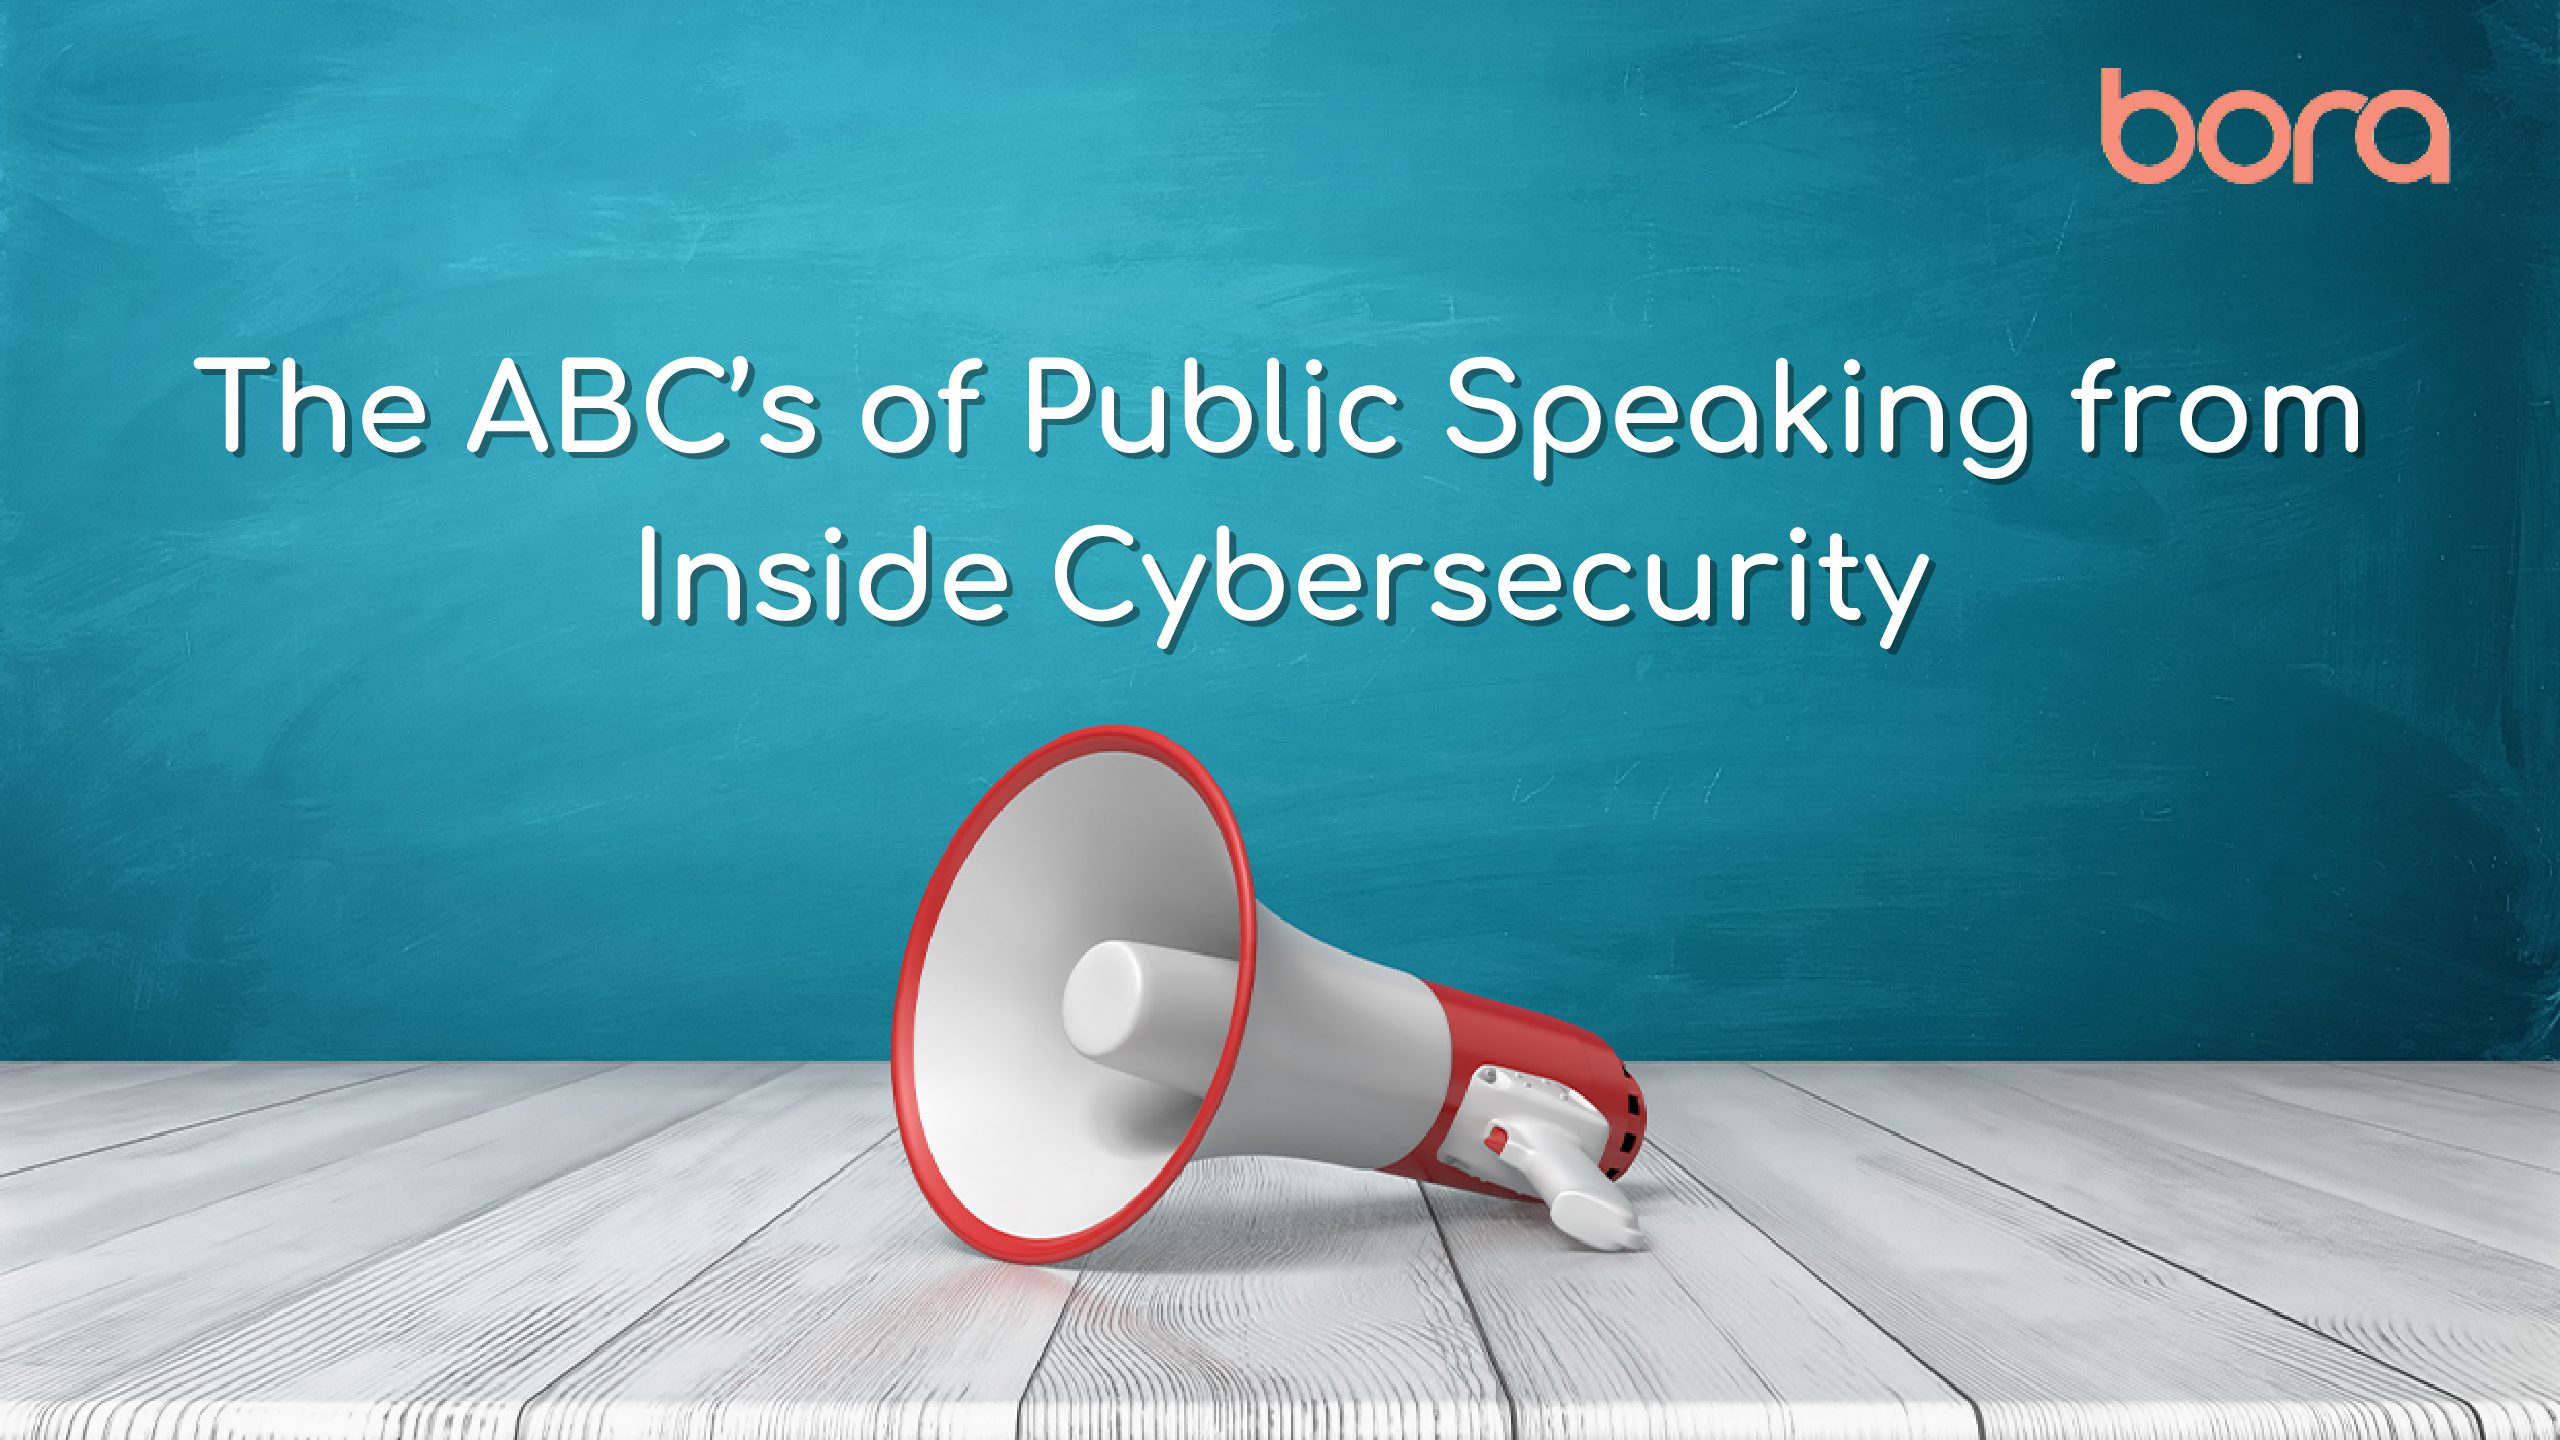 The ABC’s of Public Speaking from Inside Cybersecurity